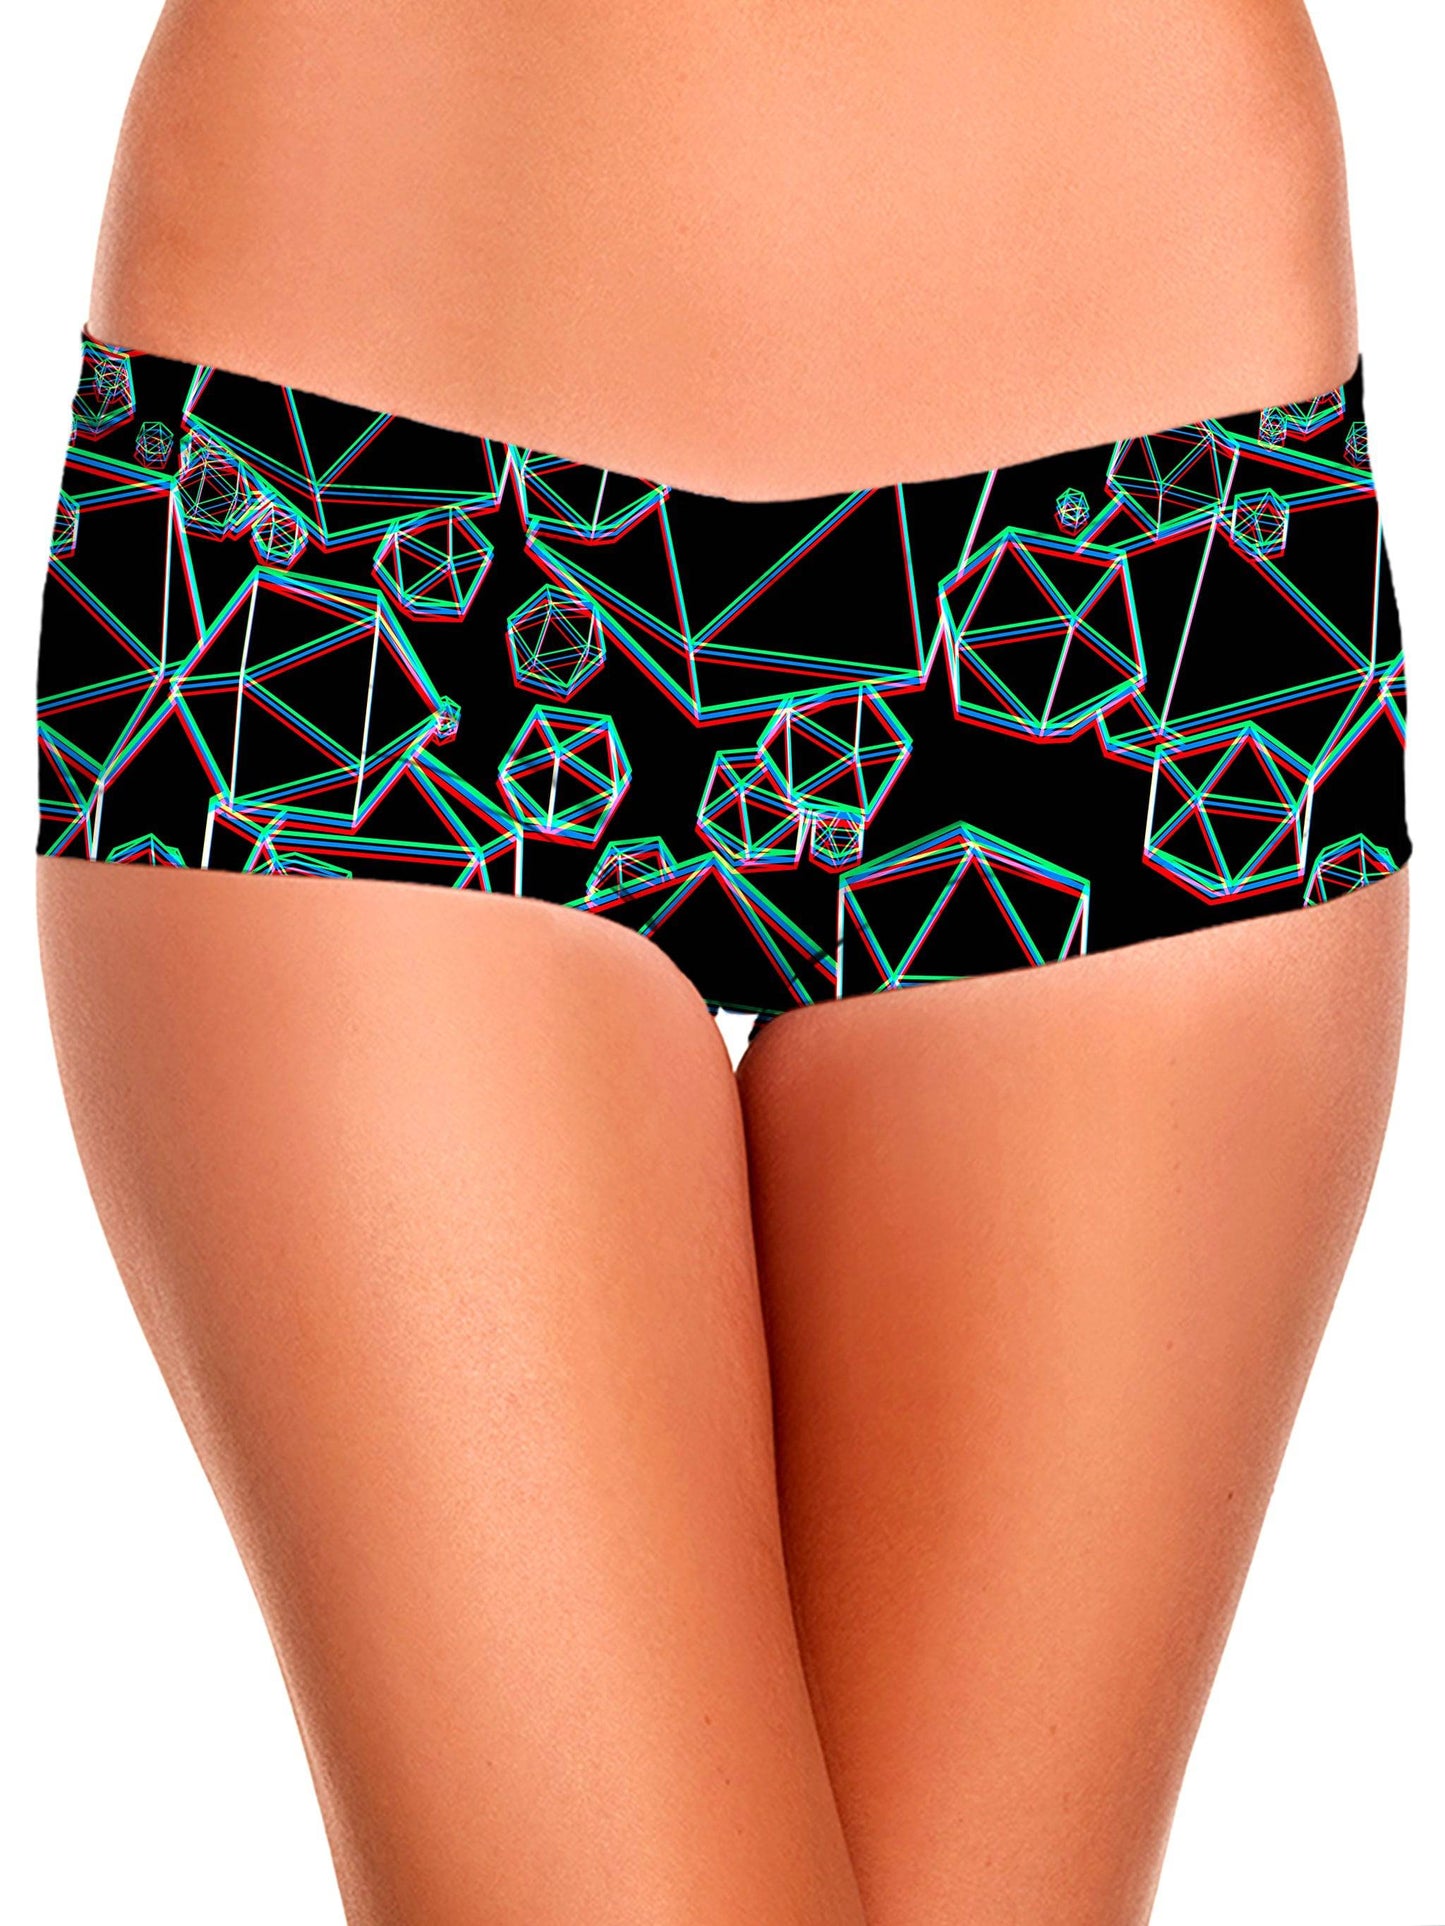 Icosahedron Madness Glitch Crop Top and Booty Shorts Combo, Yantrart Design, | iEDM